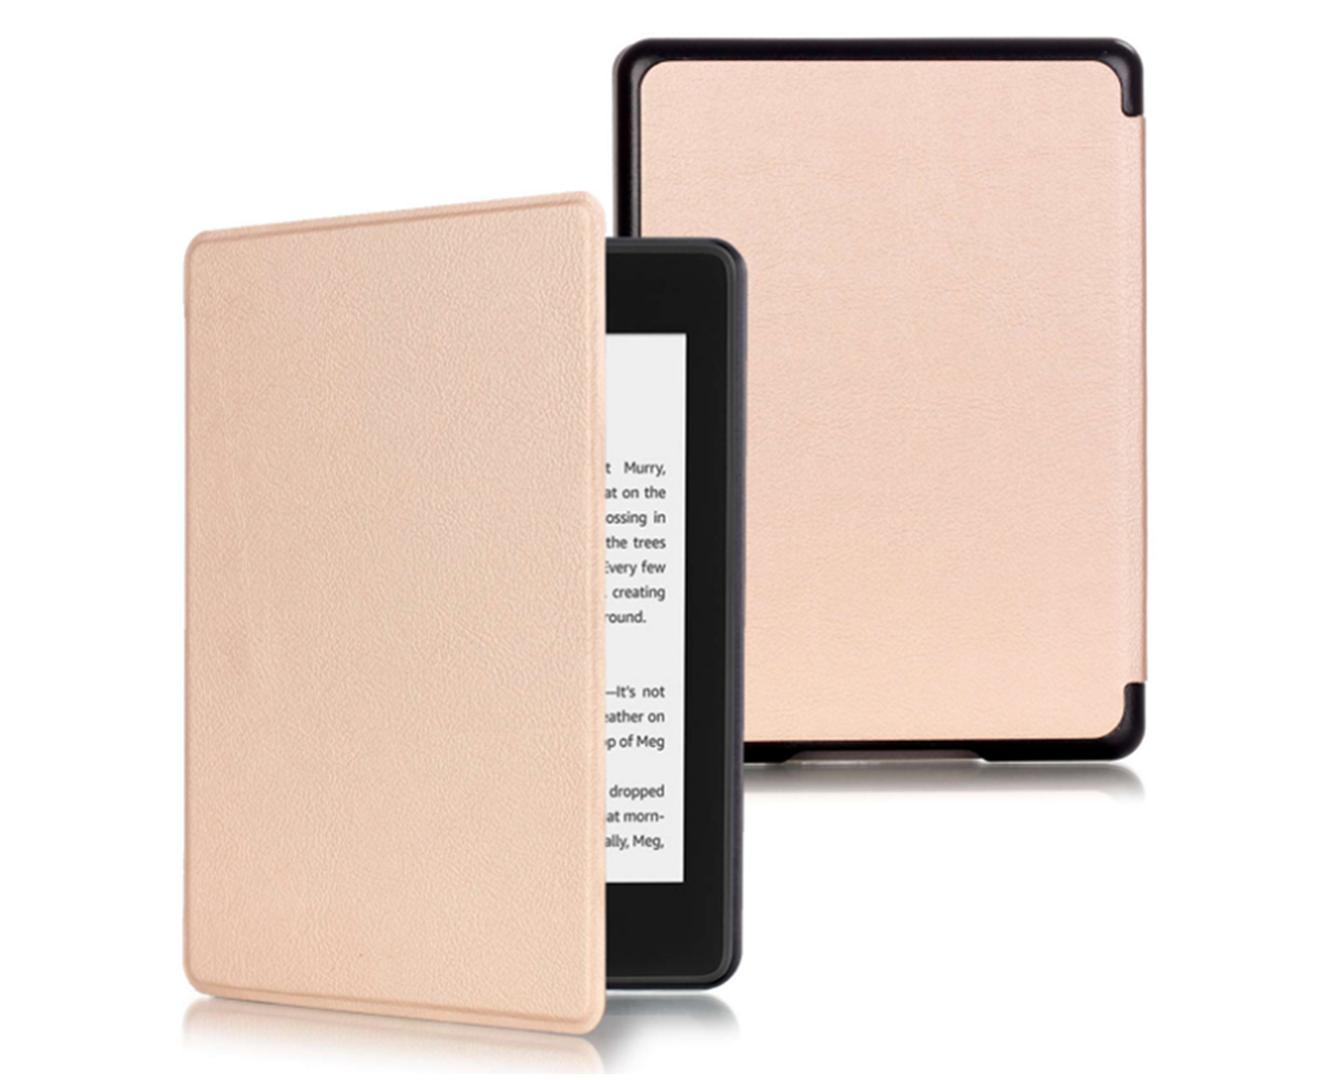 E-Book Cover For Kindle Paperwhite 4 Generation, E-Reader Cover - Gold